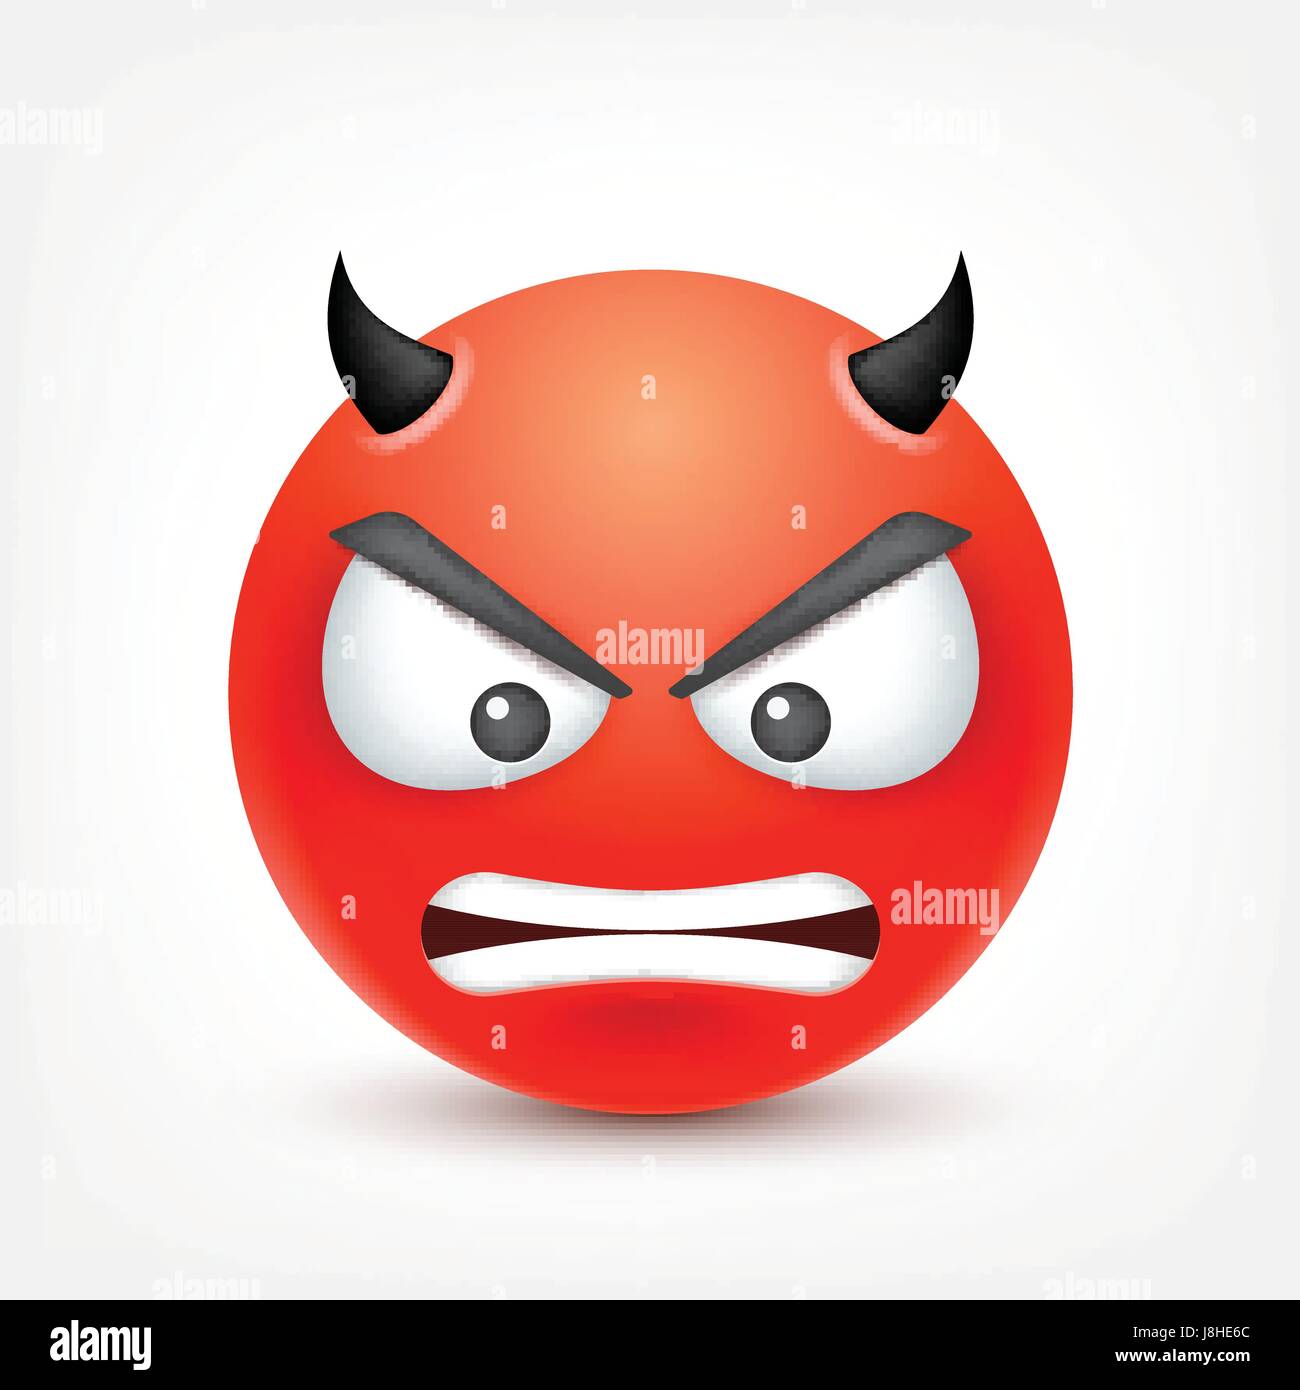 Smiley,angry,sad,devil emoticon. Redface with emotions. Facial expression. 3d realistic emoji. Funny cartoon character.Mood. Web icon. Vector illustration. Stock Vector